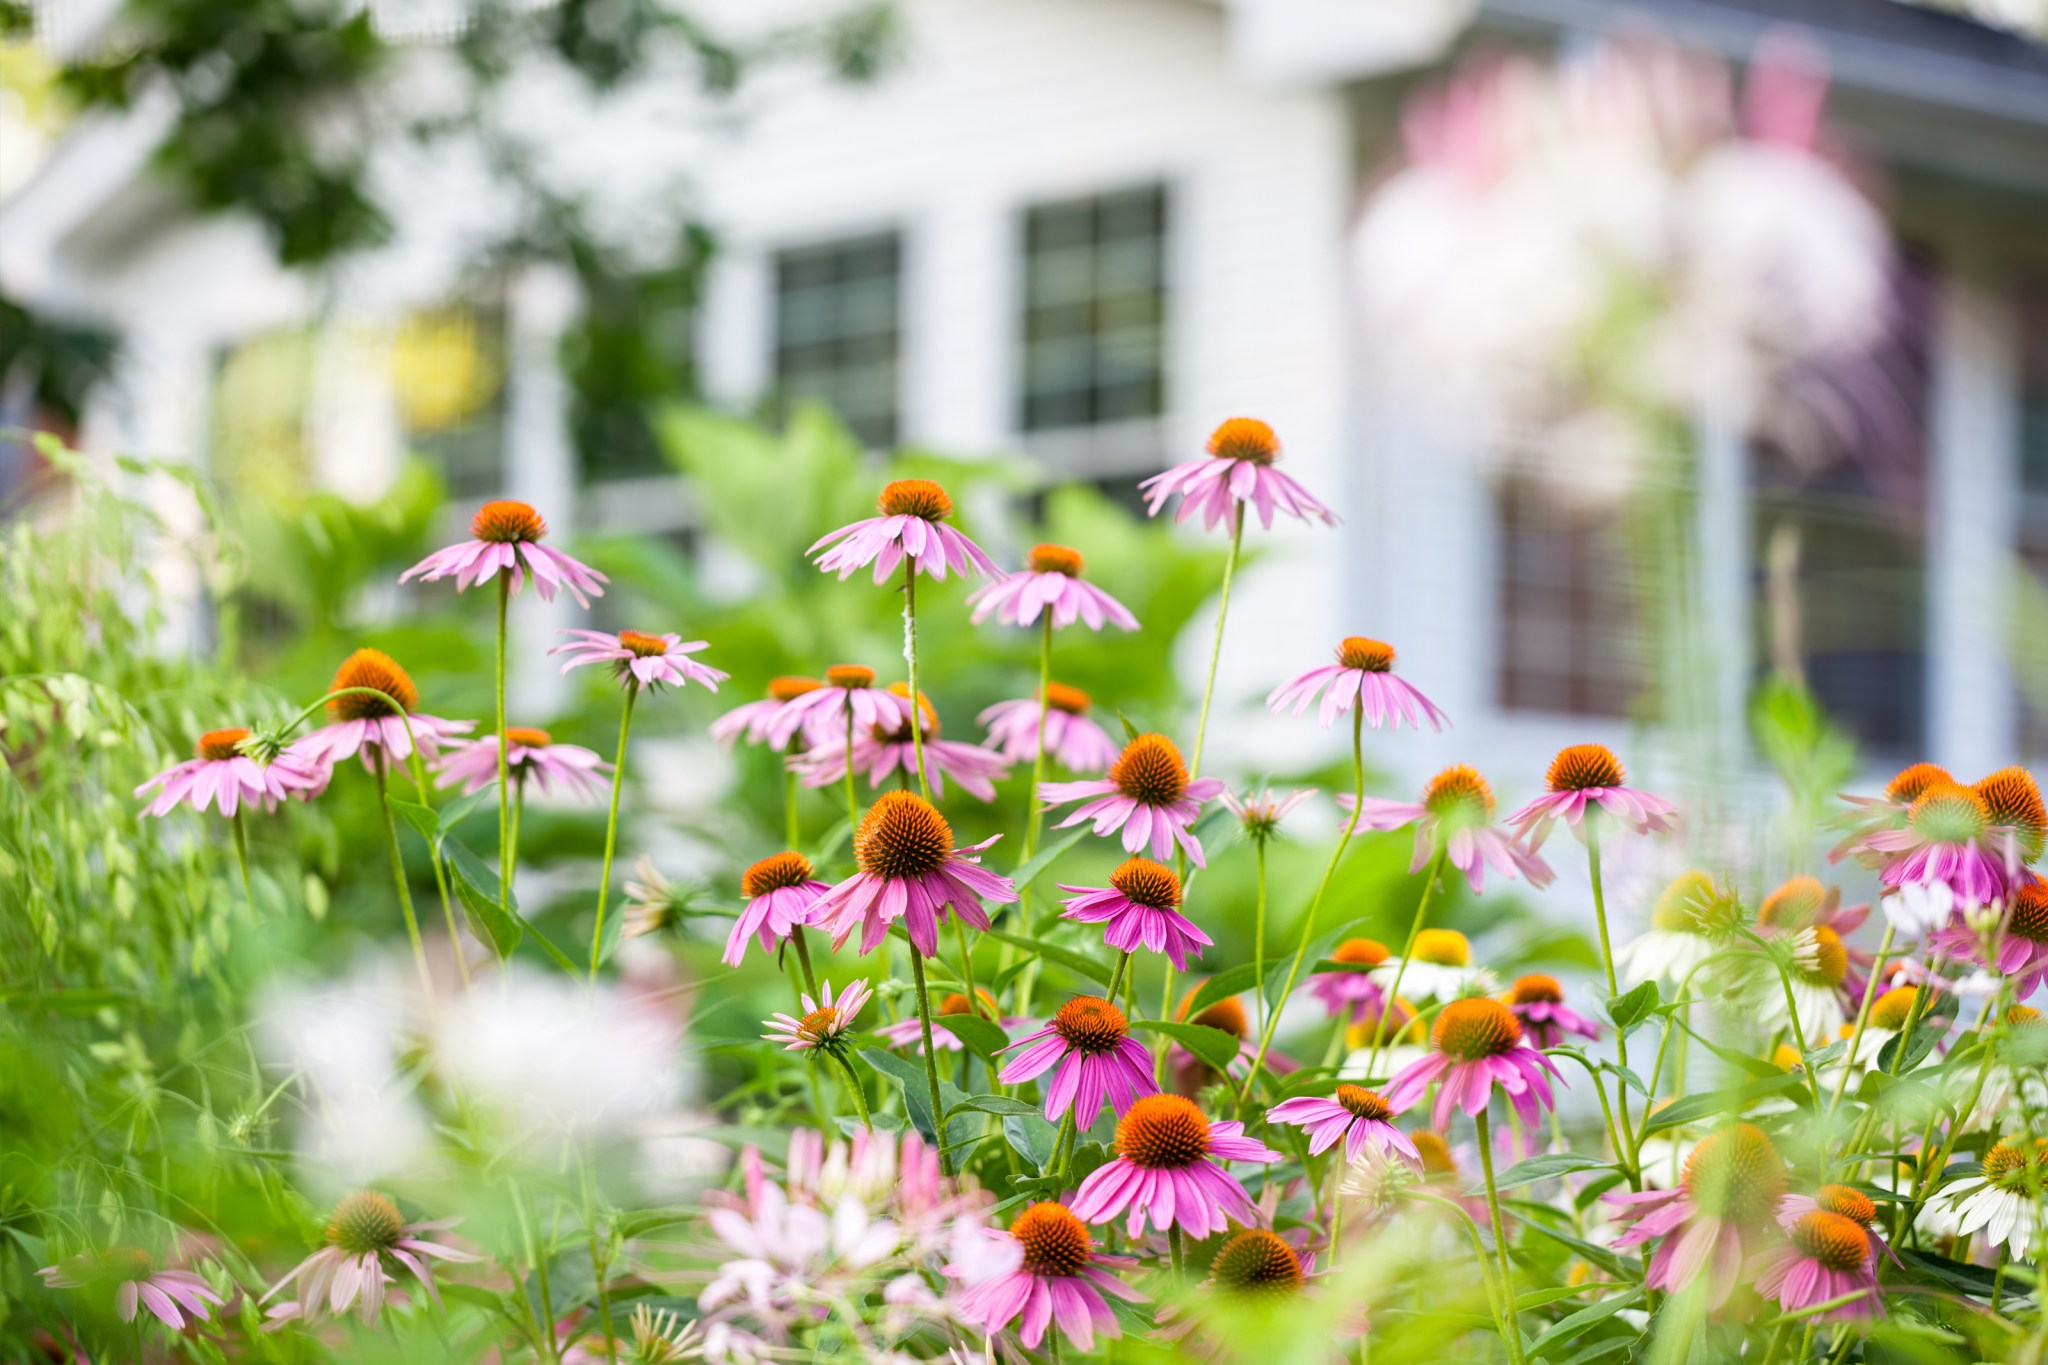 Colorful coneflowers in the yard of a home